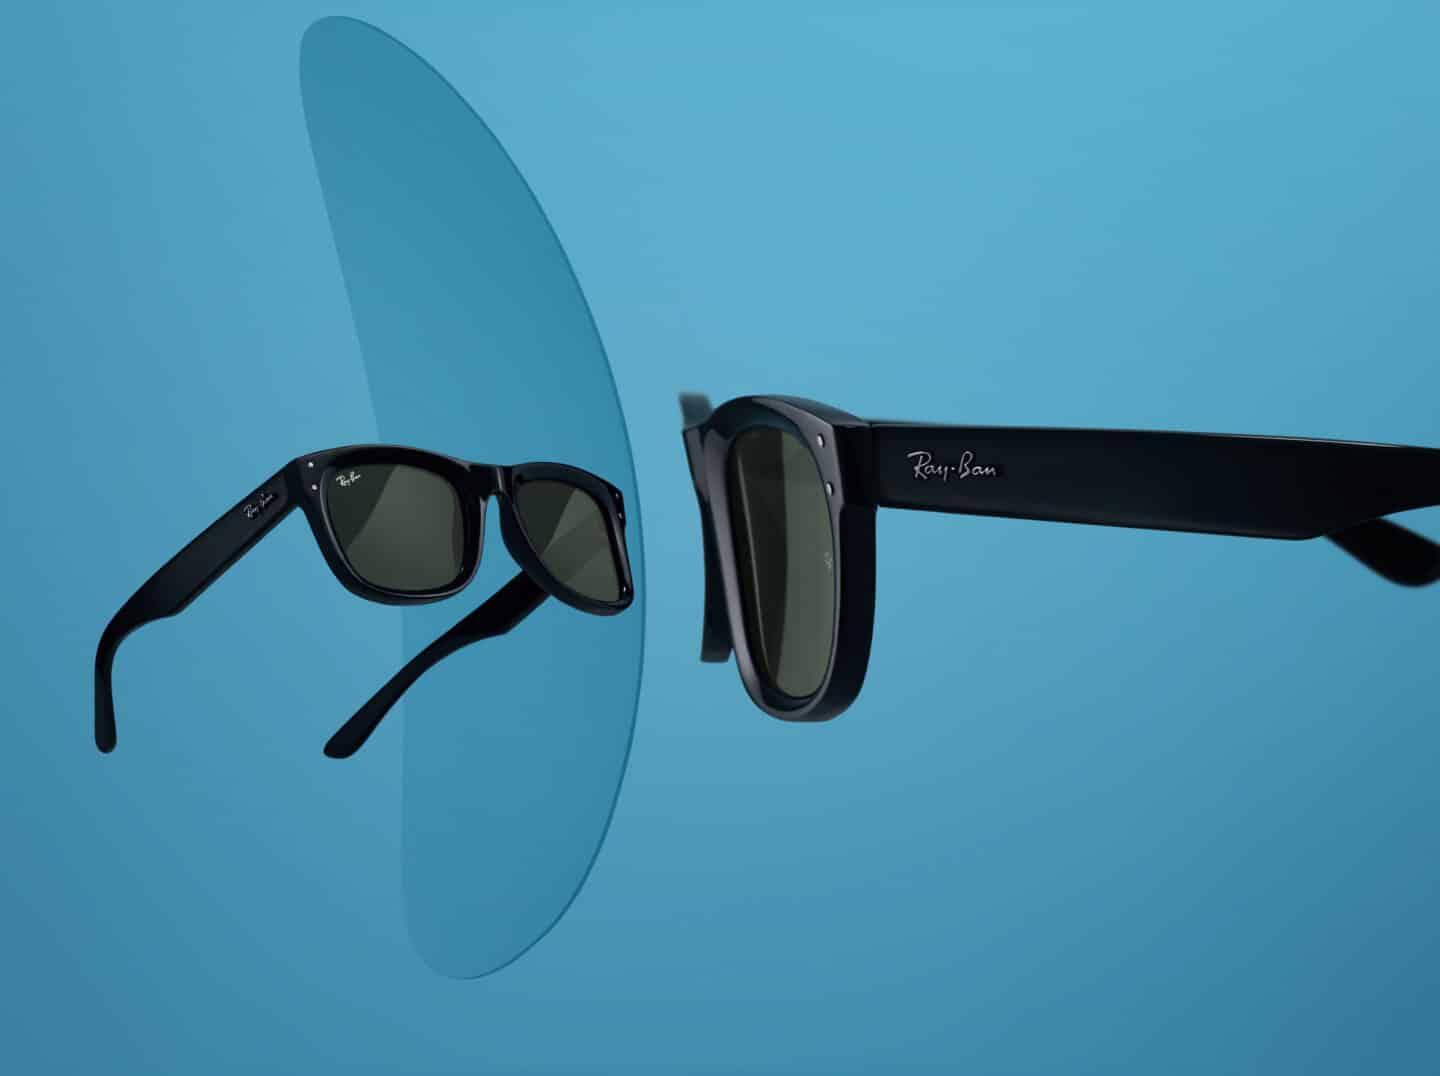 Ray-Ban REVERSE: A Lens you’ve never seen before